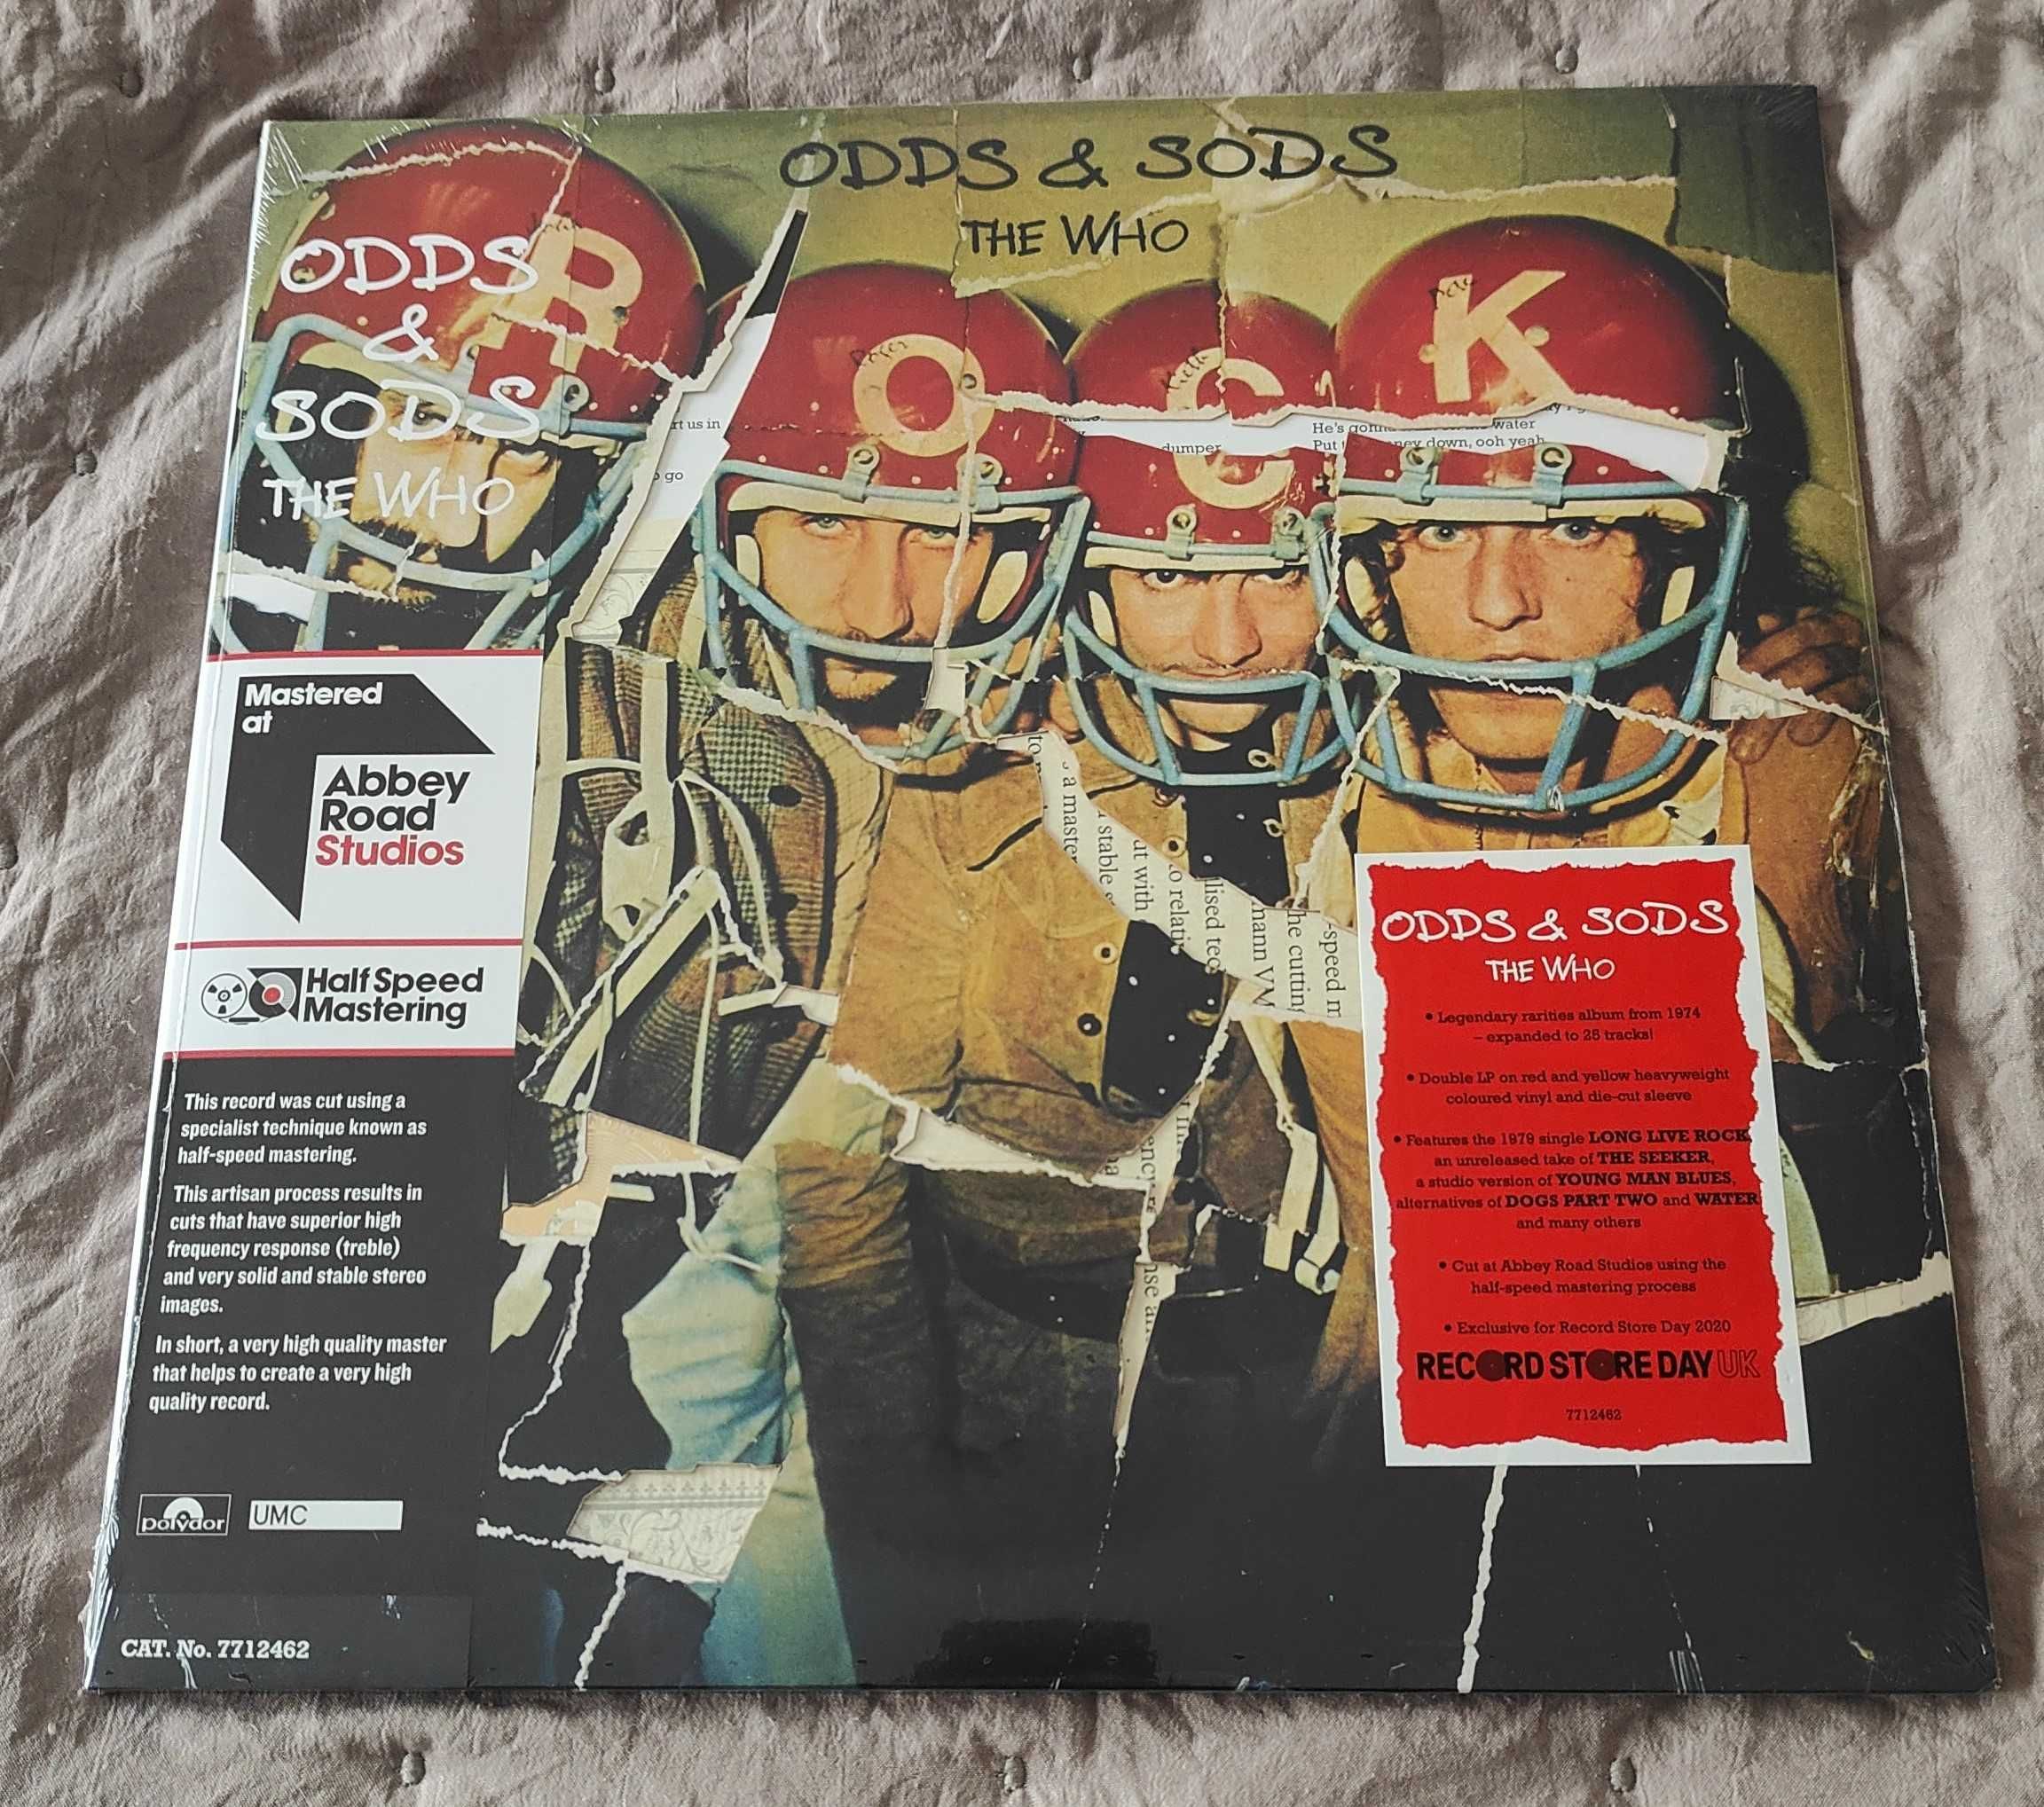 The Who - "Odds & Sods" 2Lp RSD 2020 (Half Speed Mastering)